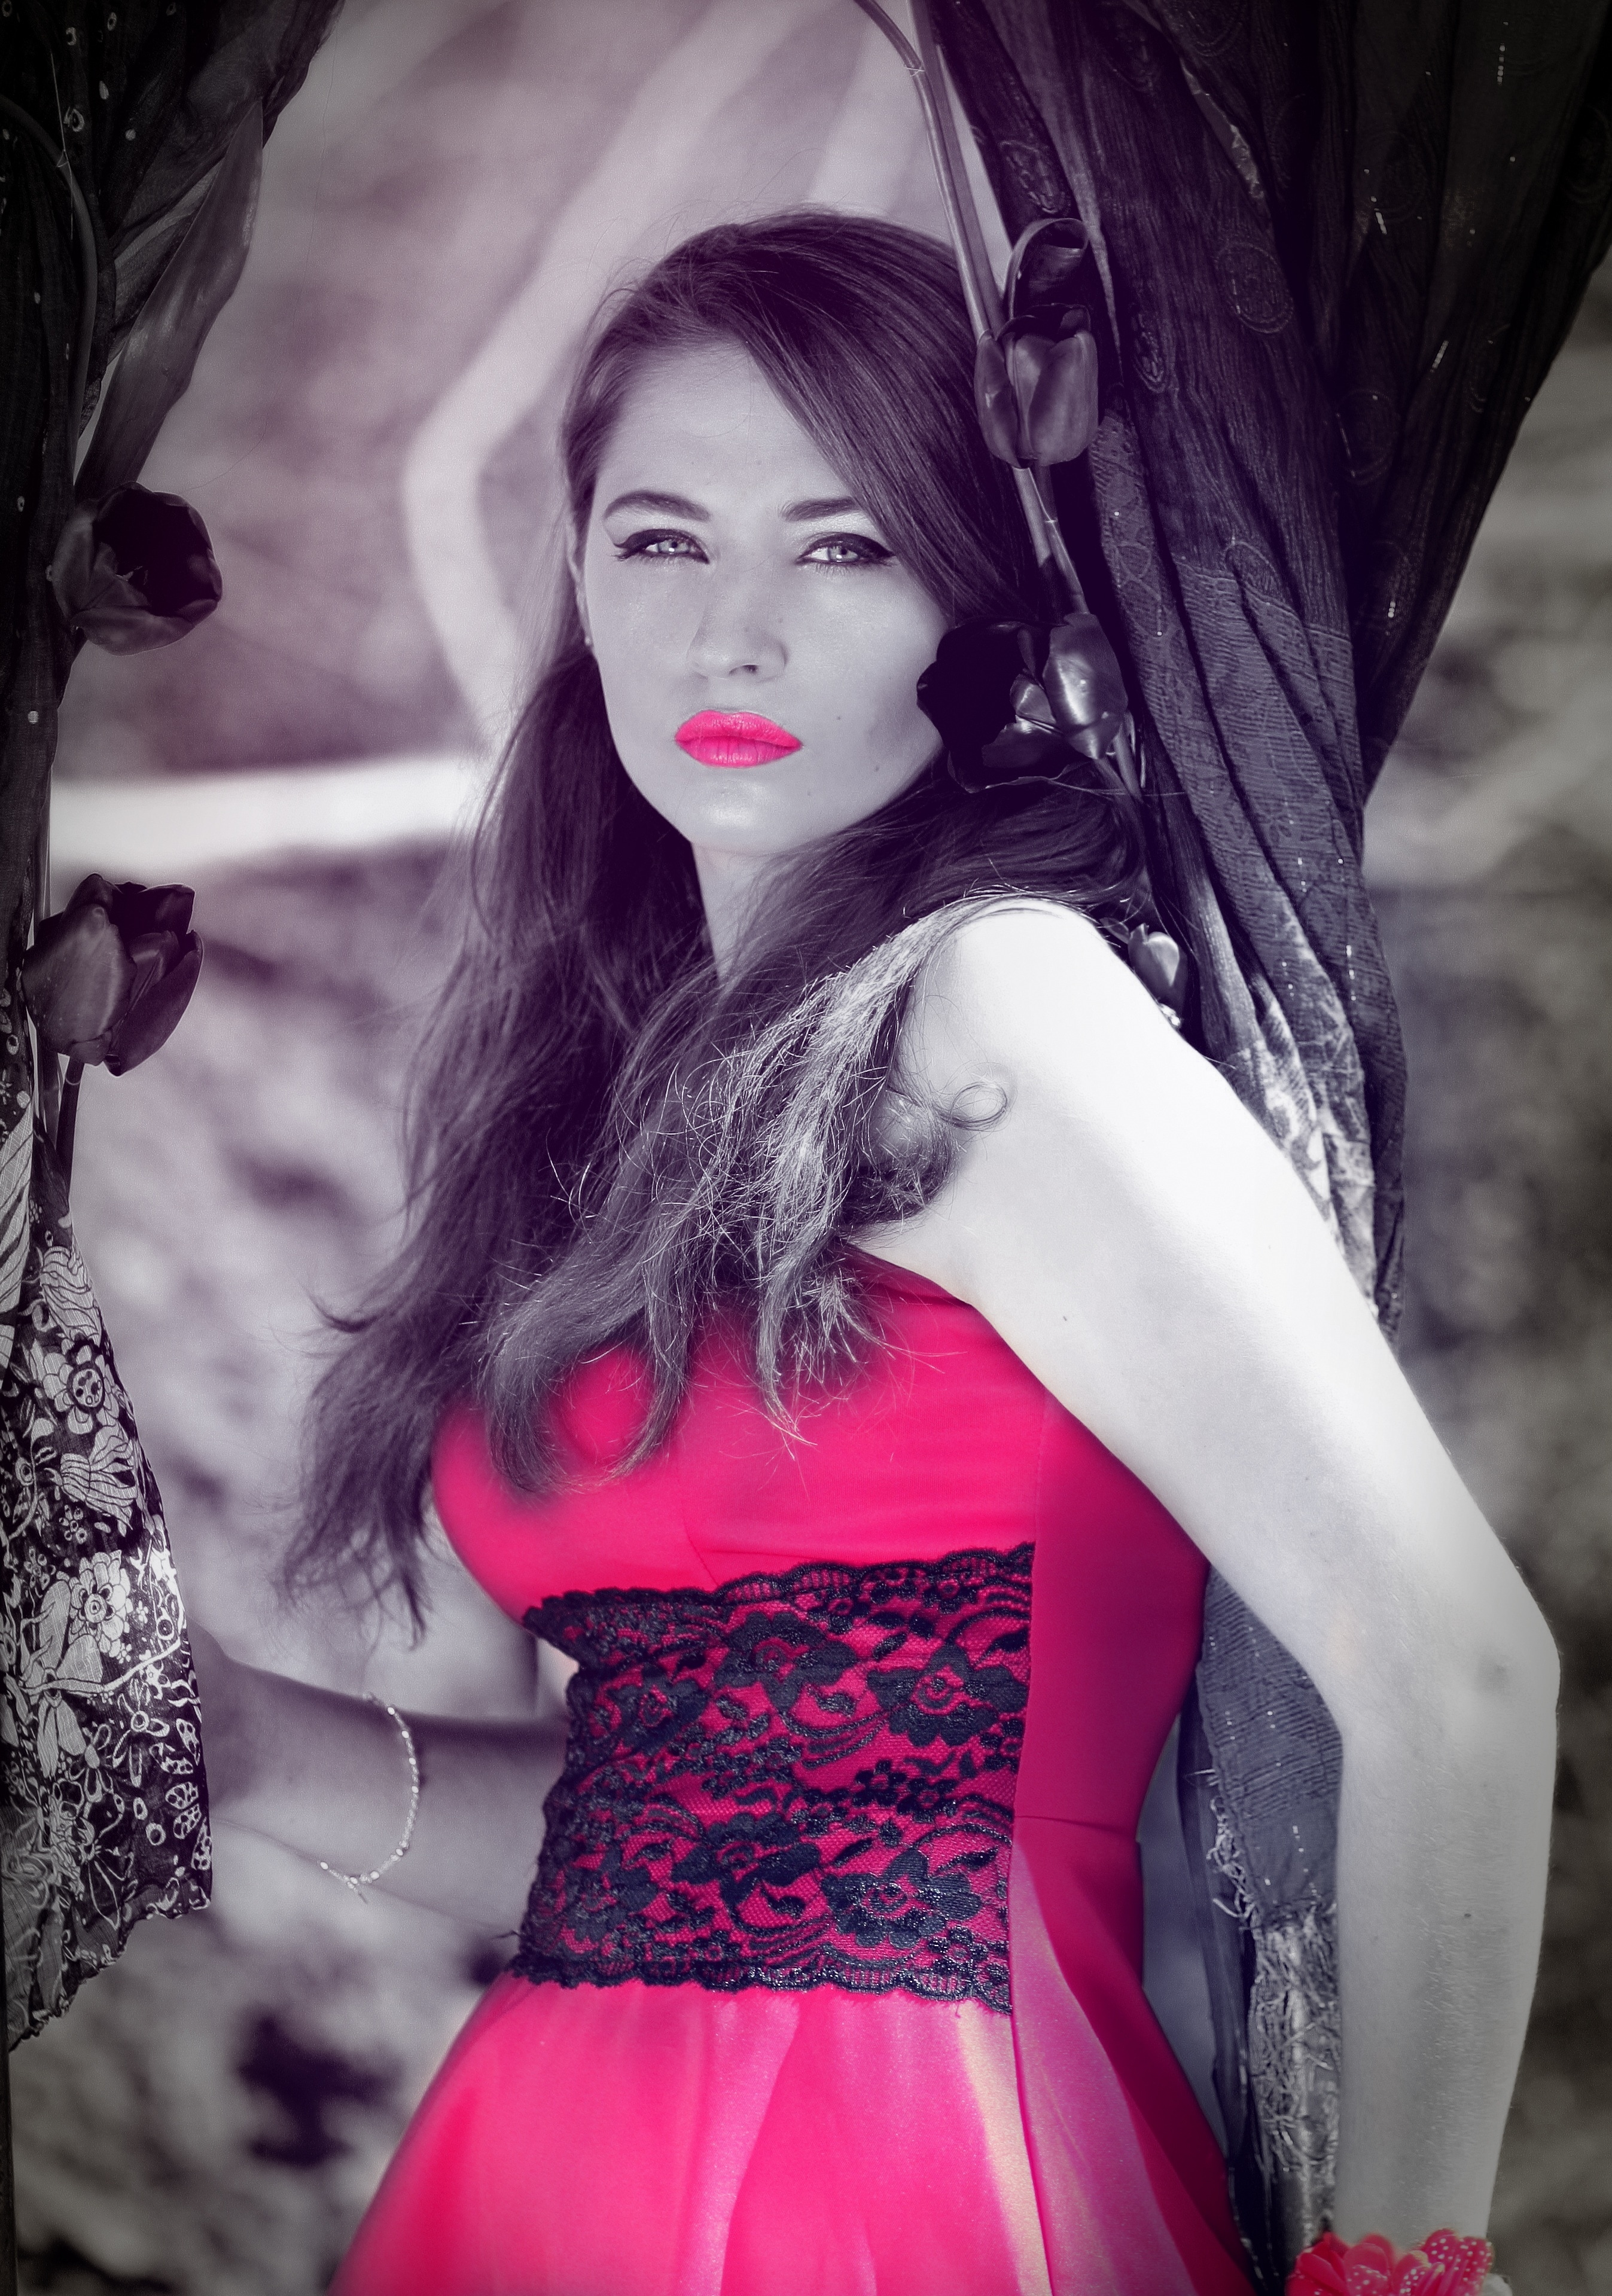 selective color photo of women's red and black dress